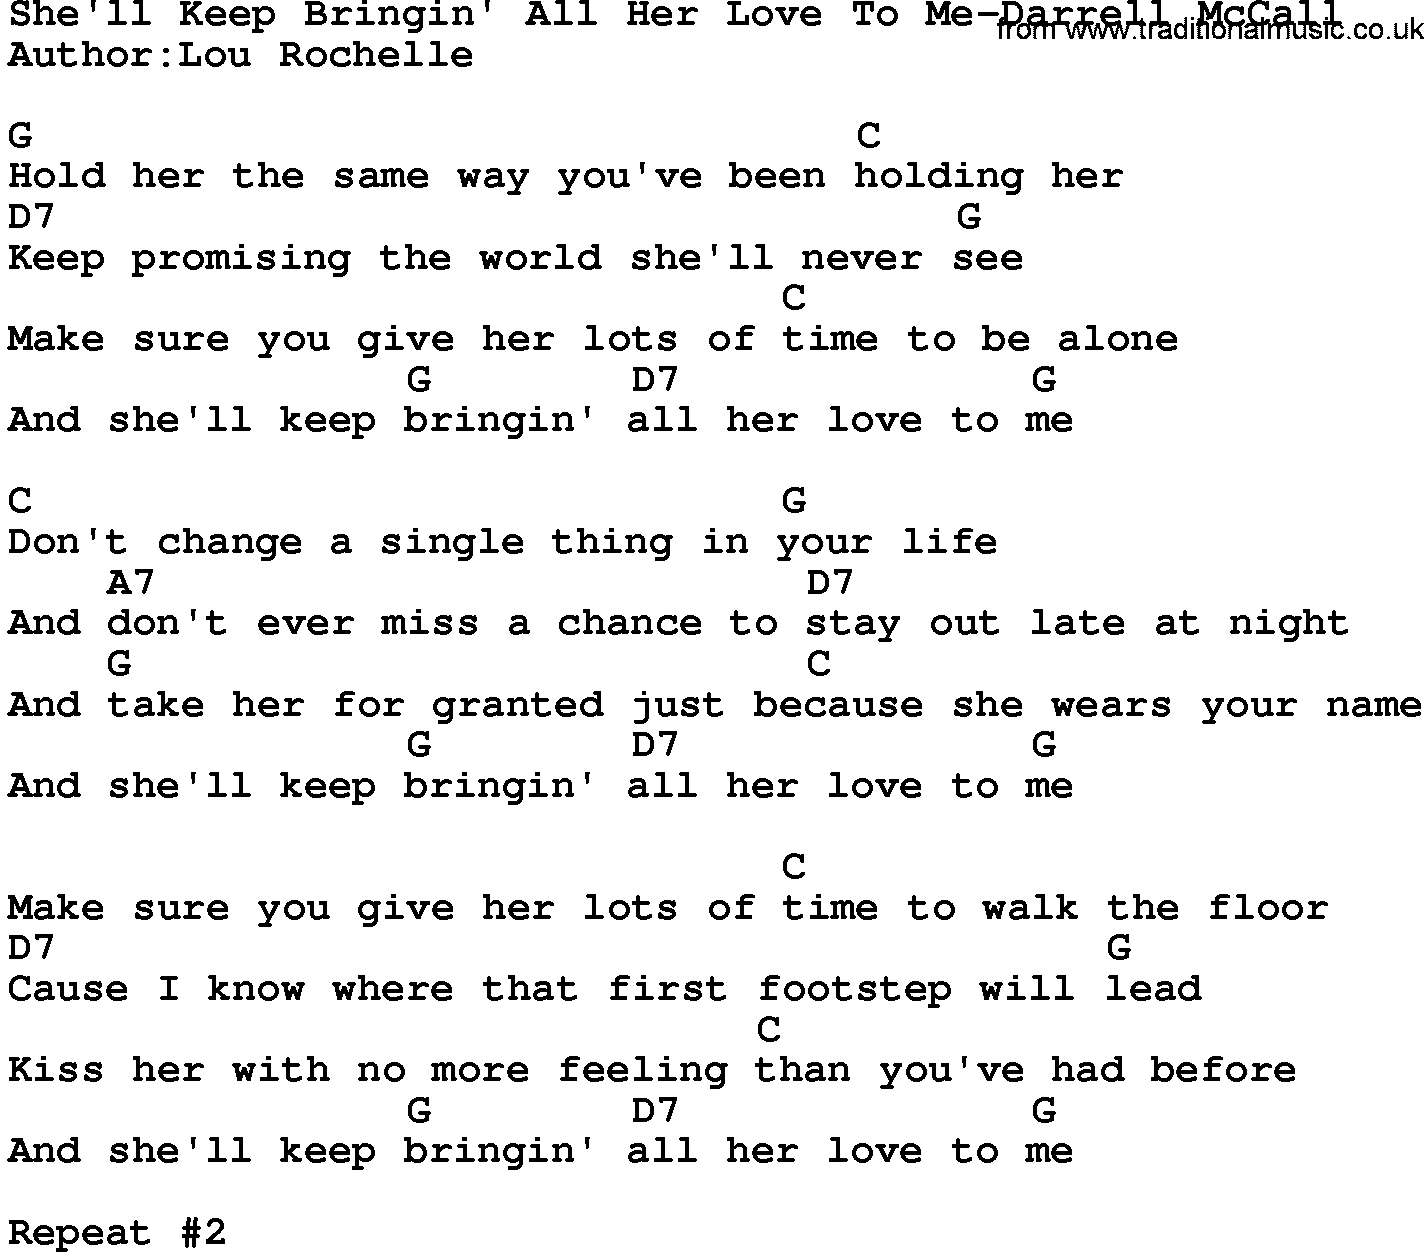 Country music song: She'll Keep Bringin' All Her Love To Me-Darrell Mccall lyrics and chords